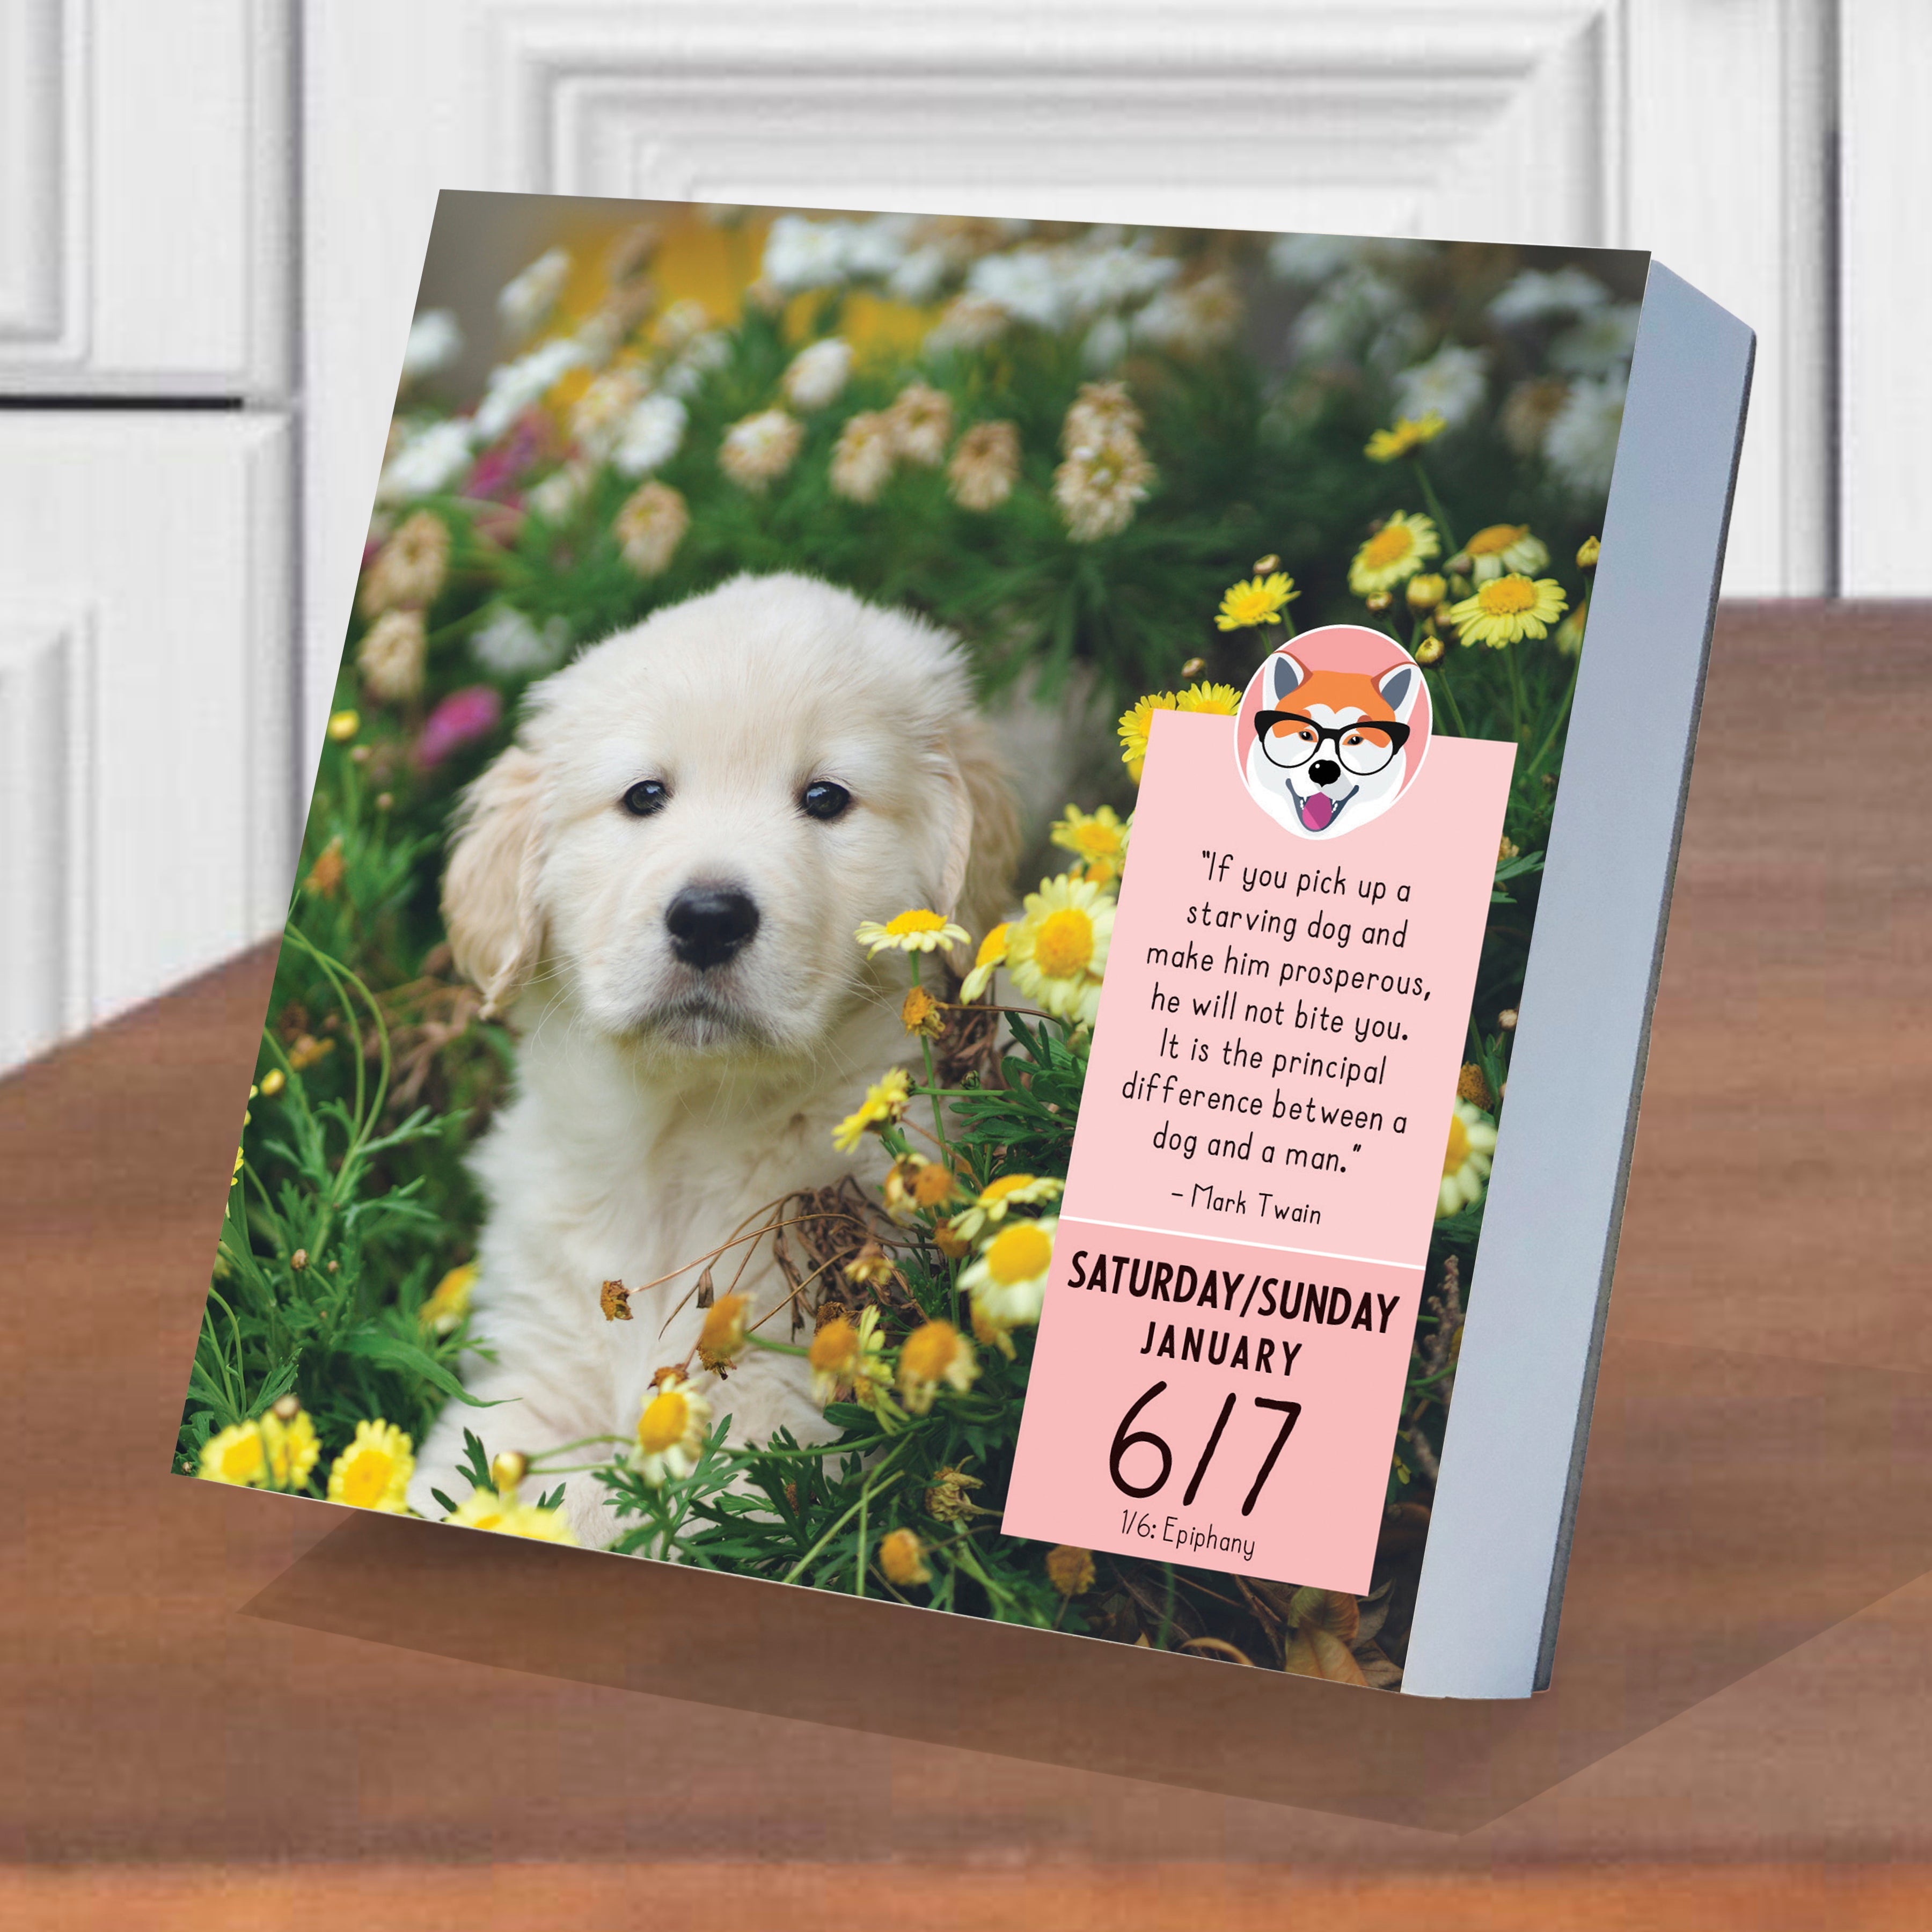 2024 Dog A Day Daily Boxed PageADay Dogs & Puppies Calendars by